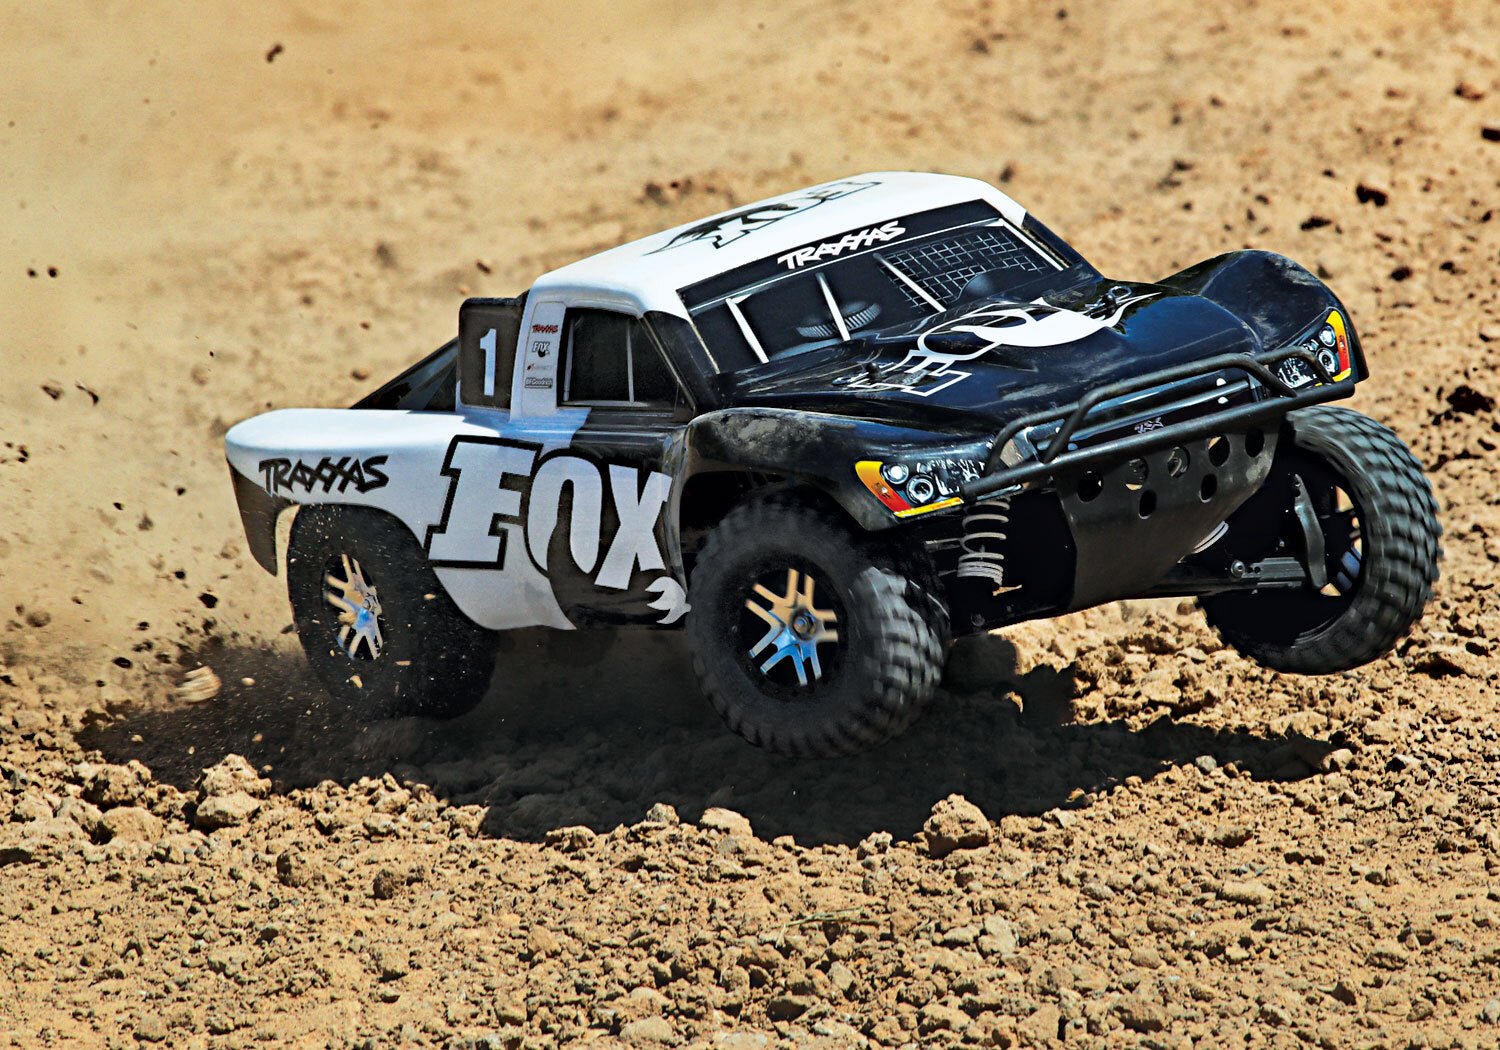 Slash 4X4: 1/10 Scale 4WD Electric Short Course Truck with TQi Traxxas Link Enabled 2.4GHz Radio System & Traxxas Stability Management (TSM)